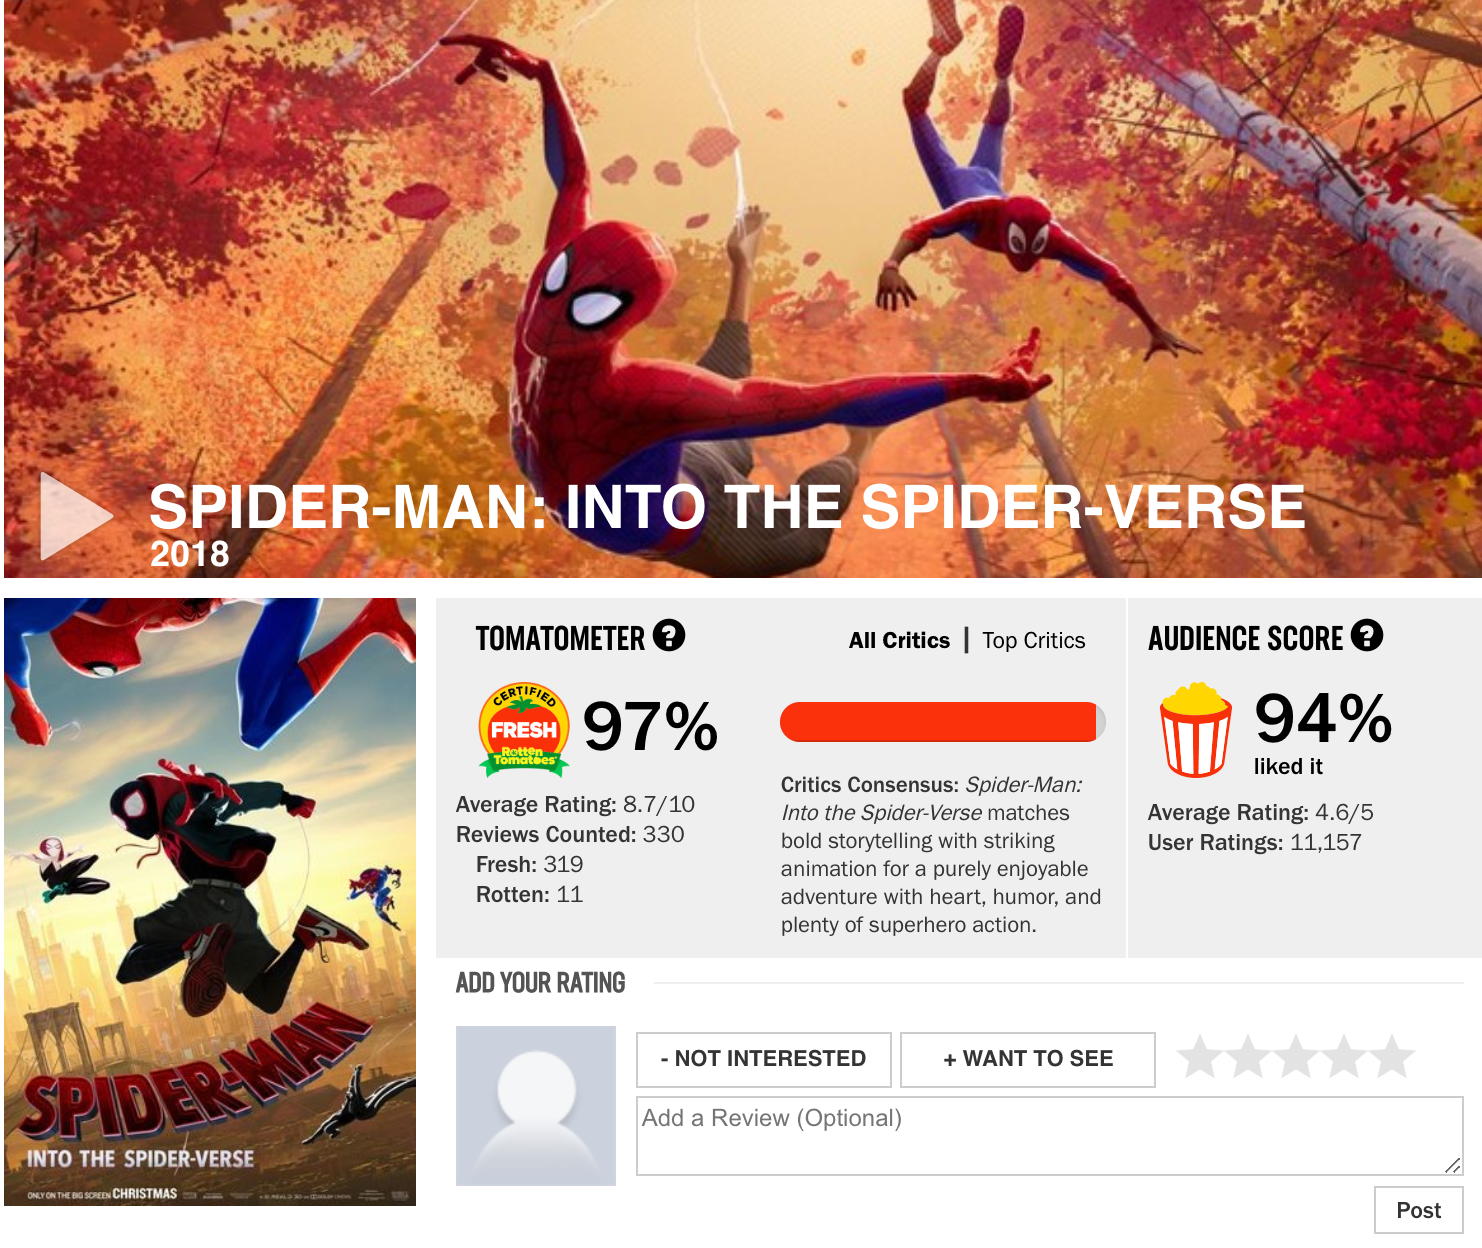 Spider-Man Into The Spider-Verse Rotten Tomatoes is PERFECT 